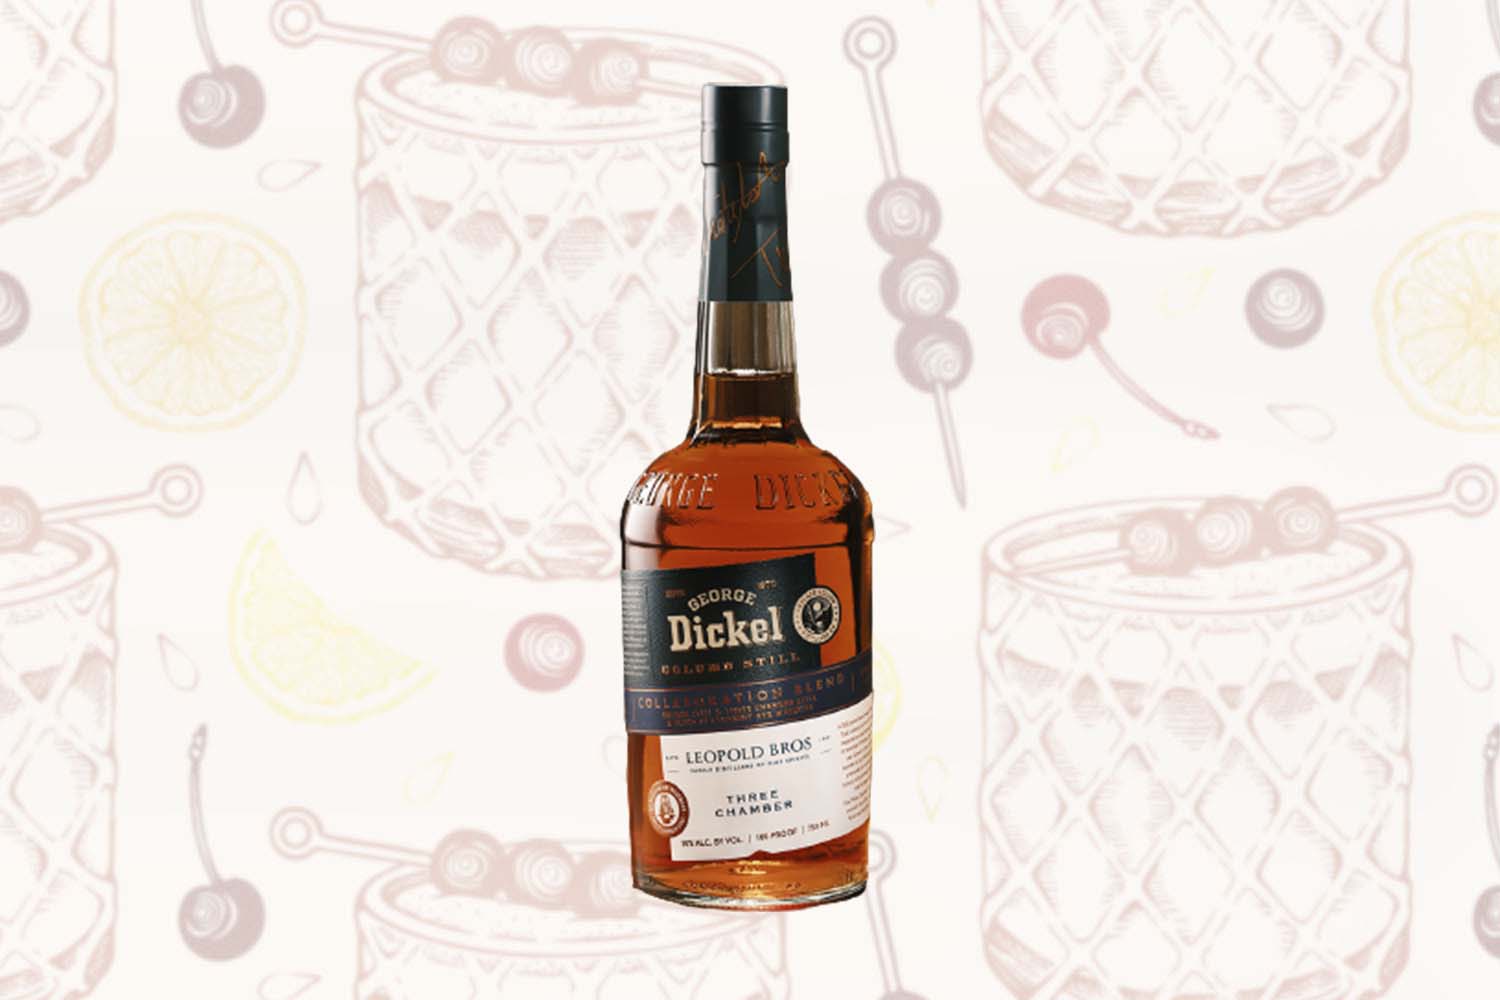 George Dickel x Leopold Bros Collaboration Blend